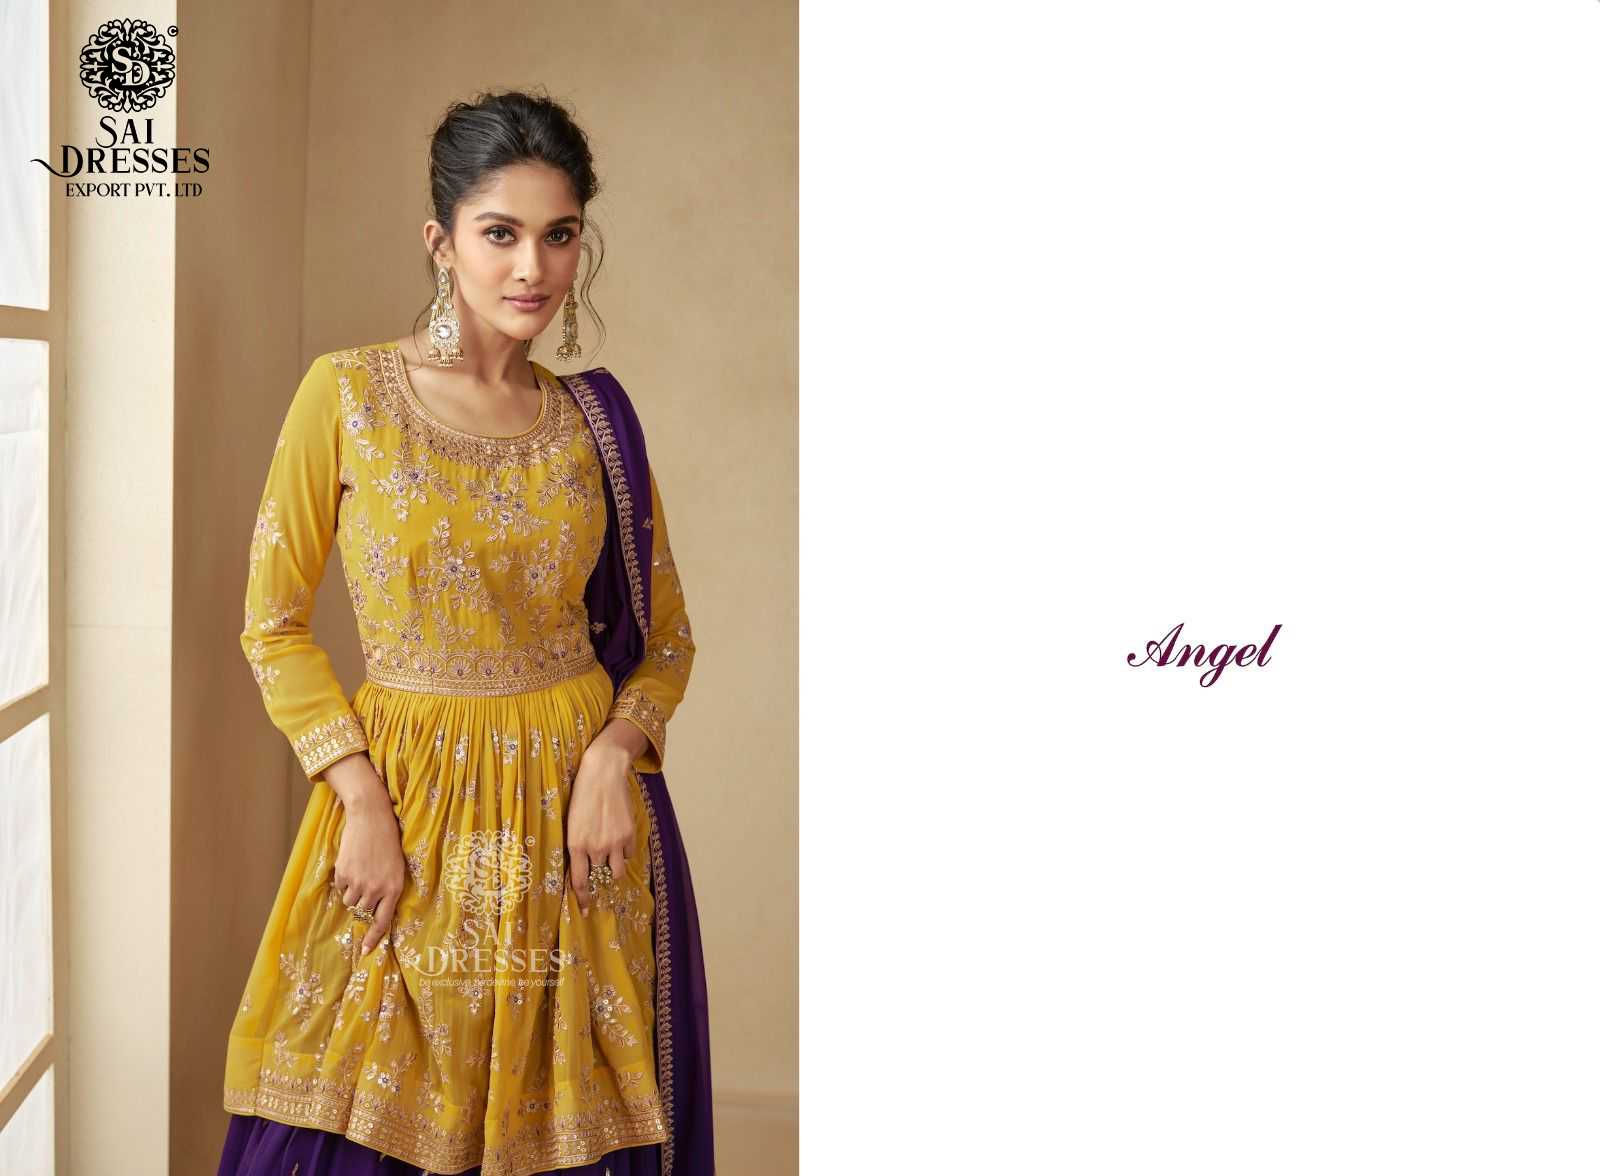 SAI DRESSES PRESENT ANGEL READYMADE EXCLUSIVE WEAR PEPLUM WITH SKIRT STYLE HEAVY DESIGNER SUITS IN WHOLESALE RATE IN SURAT